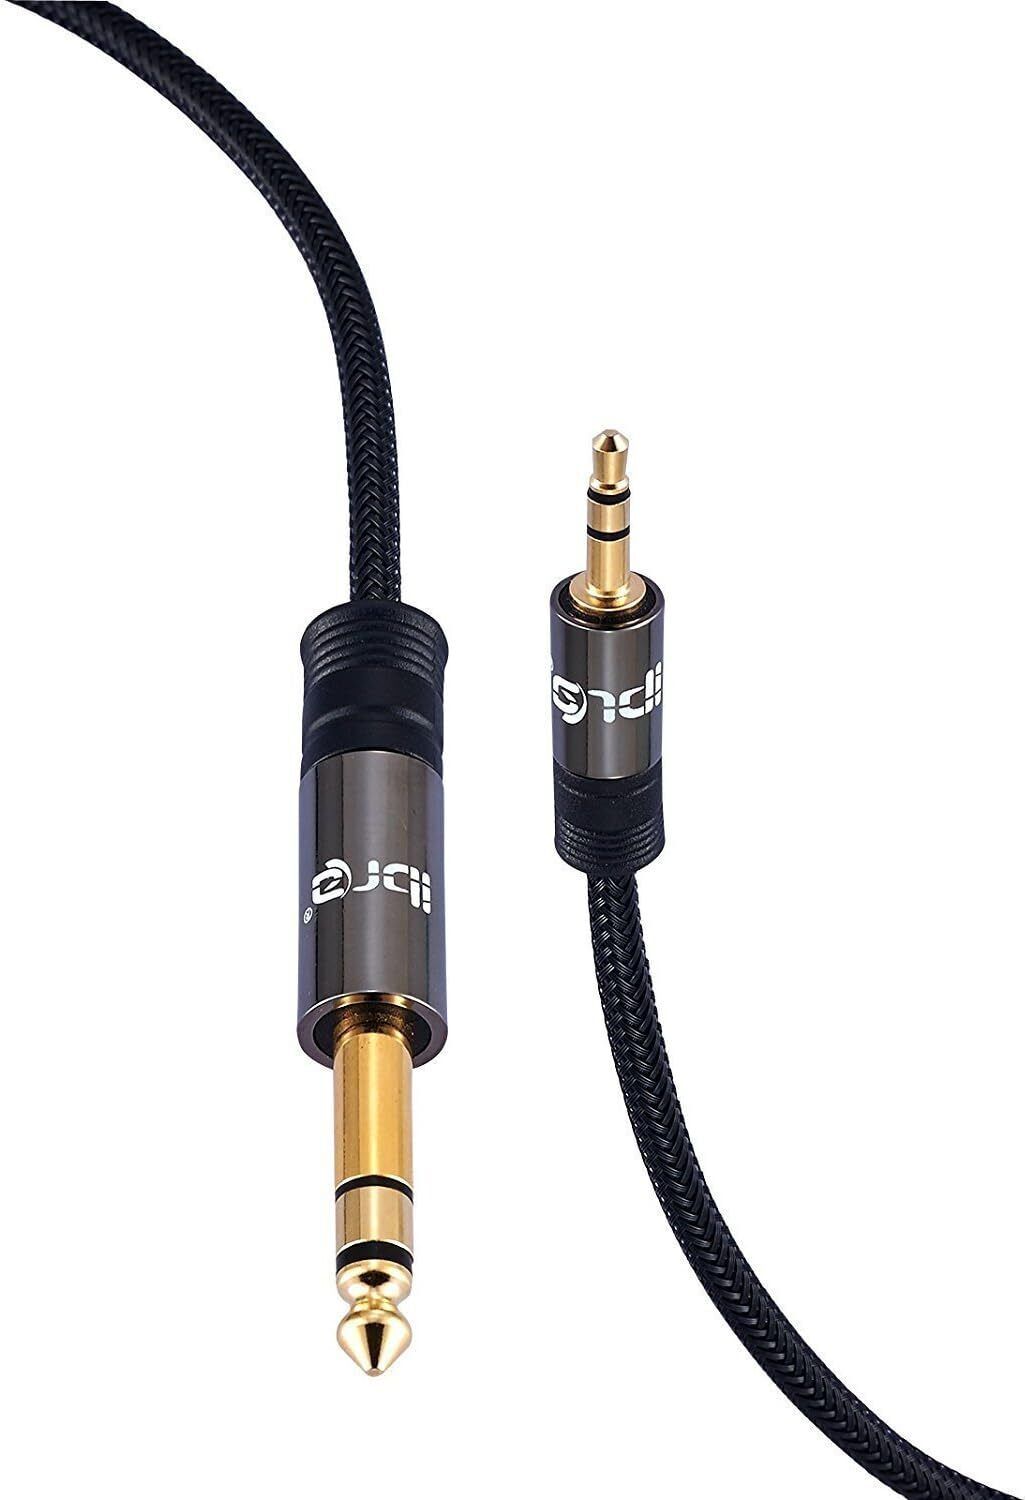 3.5mm to 6.35mm 1/4 inch Small to Big Mono Jack Audio Cable Plug Patch Lead Amp - 2M